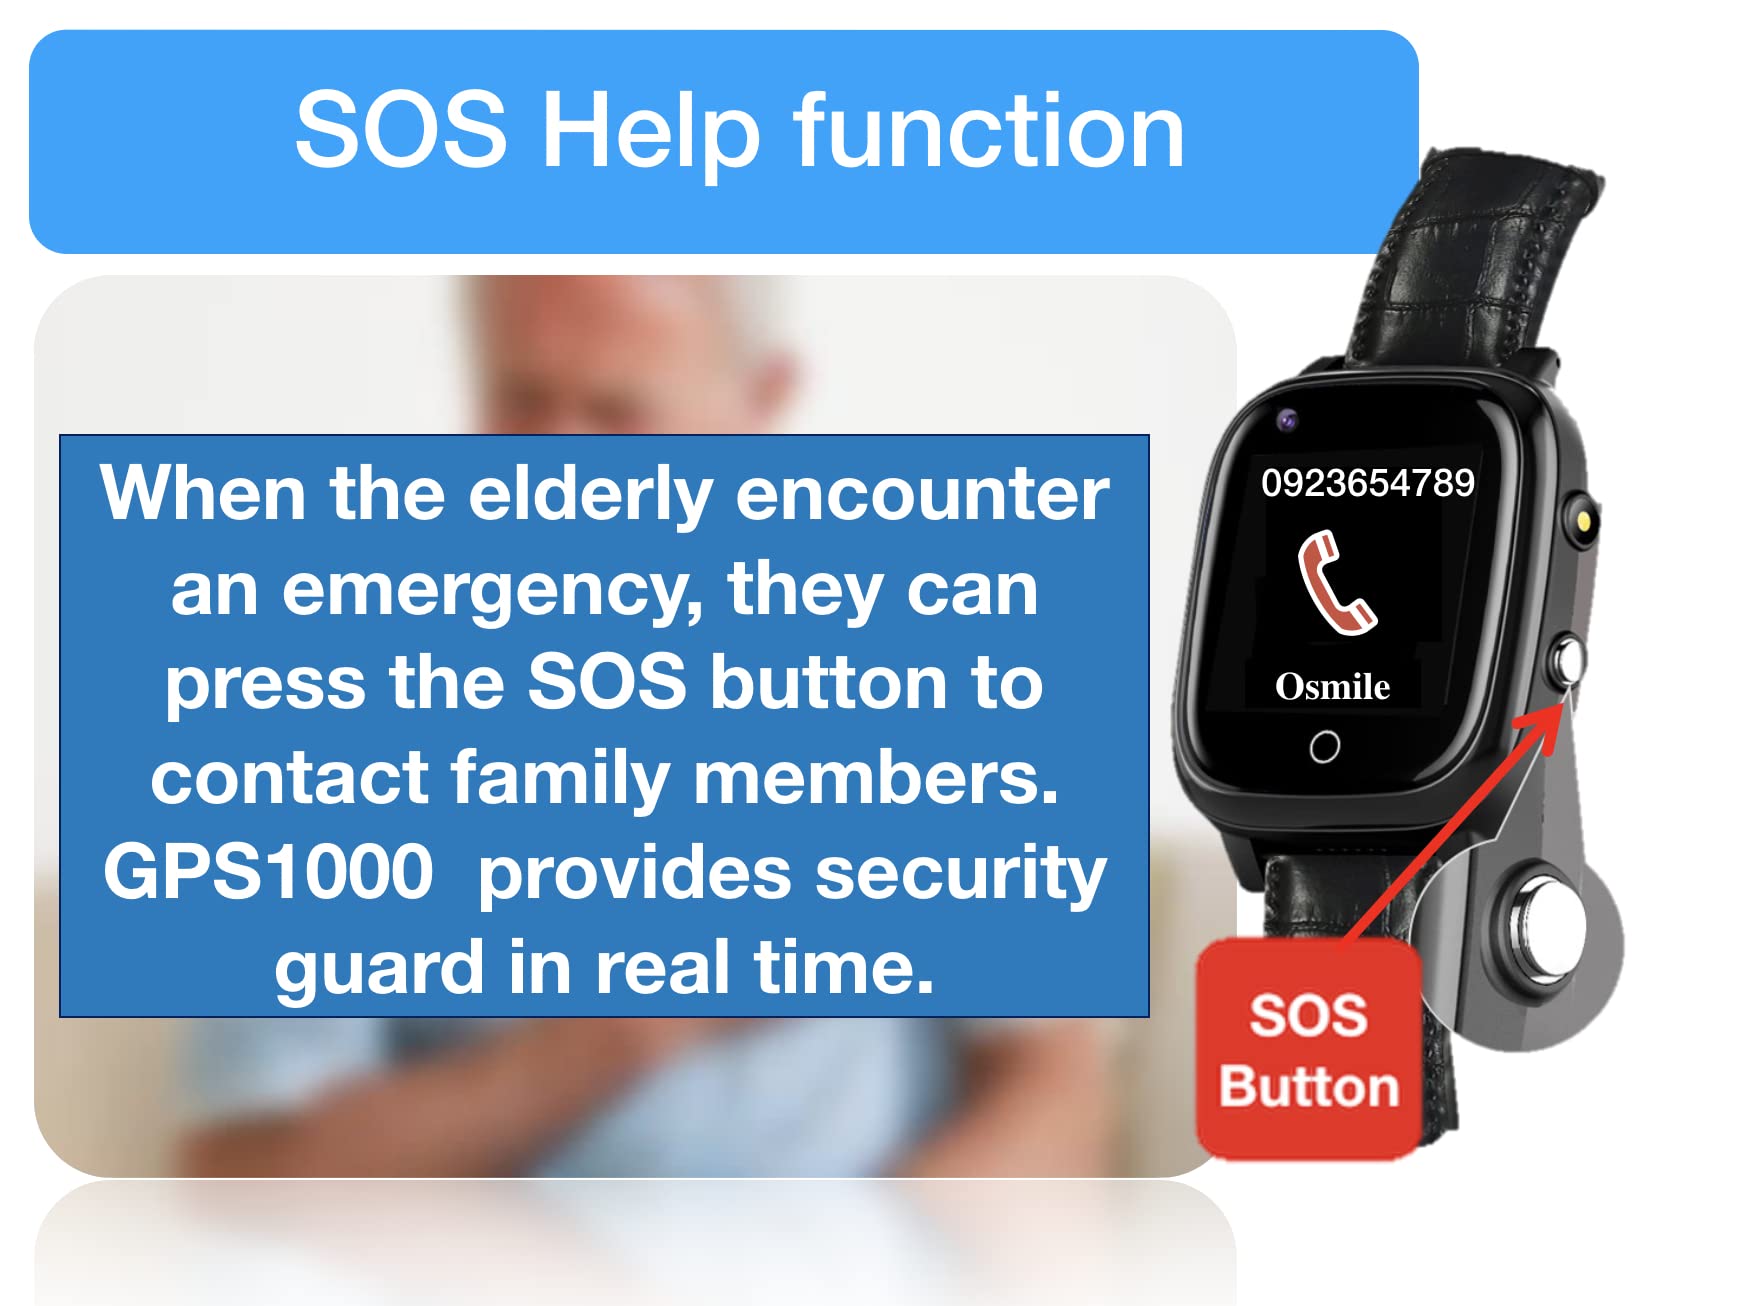 Osmile ED1000 GPS Tracker for People with Dementia, Autism, and Other Disabilities (Anti-Lost GPS Watch for Elderly & Kids with Fall Alert, SOS Button, GPS Tracking, Geo-Fence) (L)